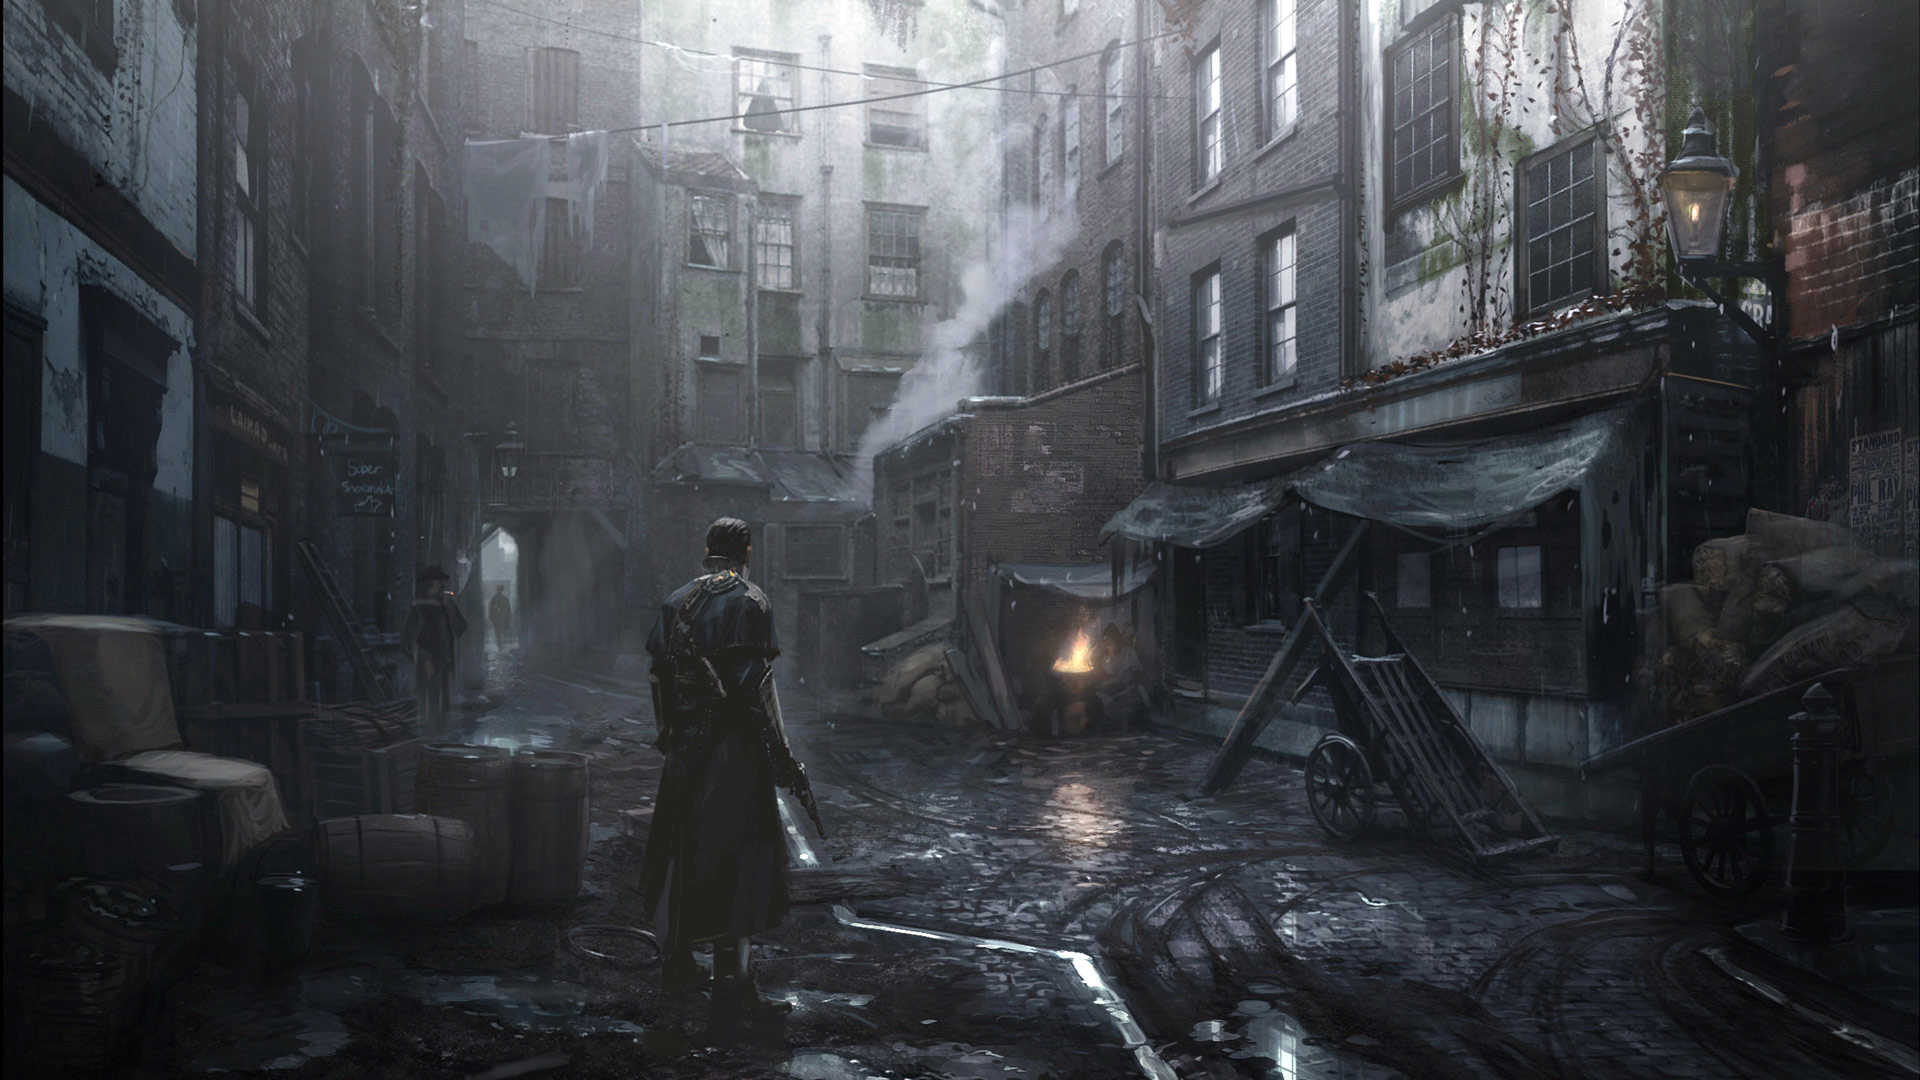 The order: 1886